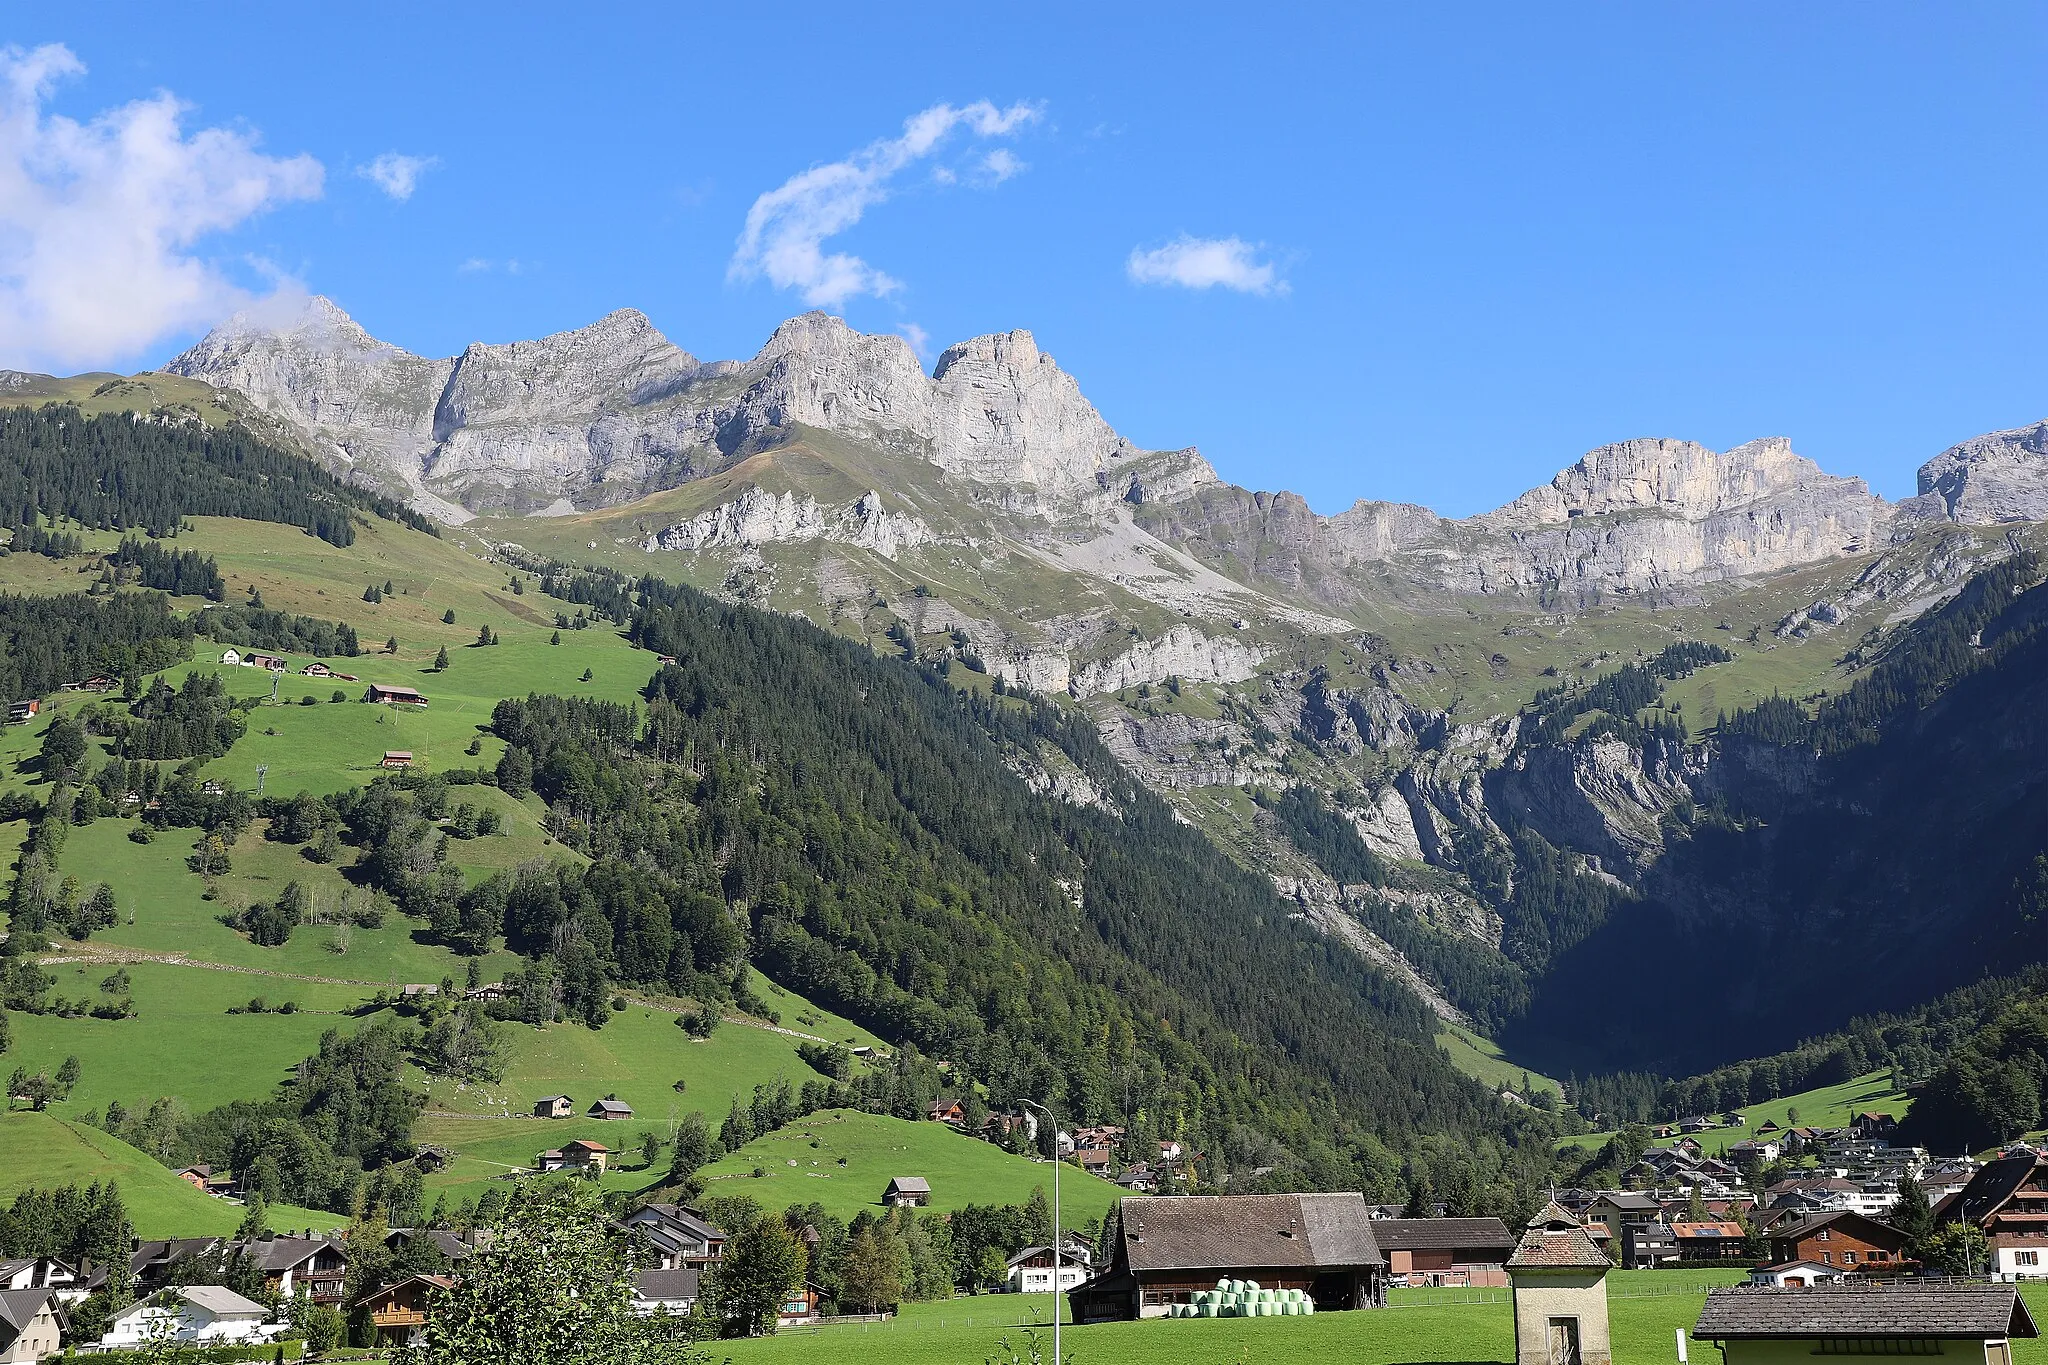 Photo showing: Engelberg in the canton of Obwalden (Switzerland). On the left in the picture Brunni (hiking area), the mountain peaks Rigidalstock (2,593 meters above sea level), Gross Sättelistock (2,637 meters above sea level), the Planggengrat and the Laucherenstock (2,639 meters above sea level) and the hamlet of Horbis im “End of the world” basin.